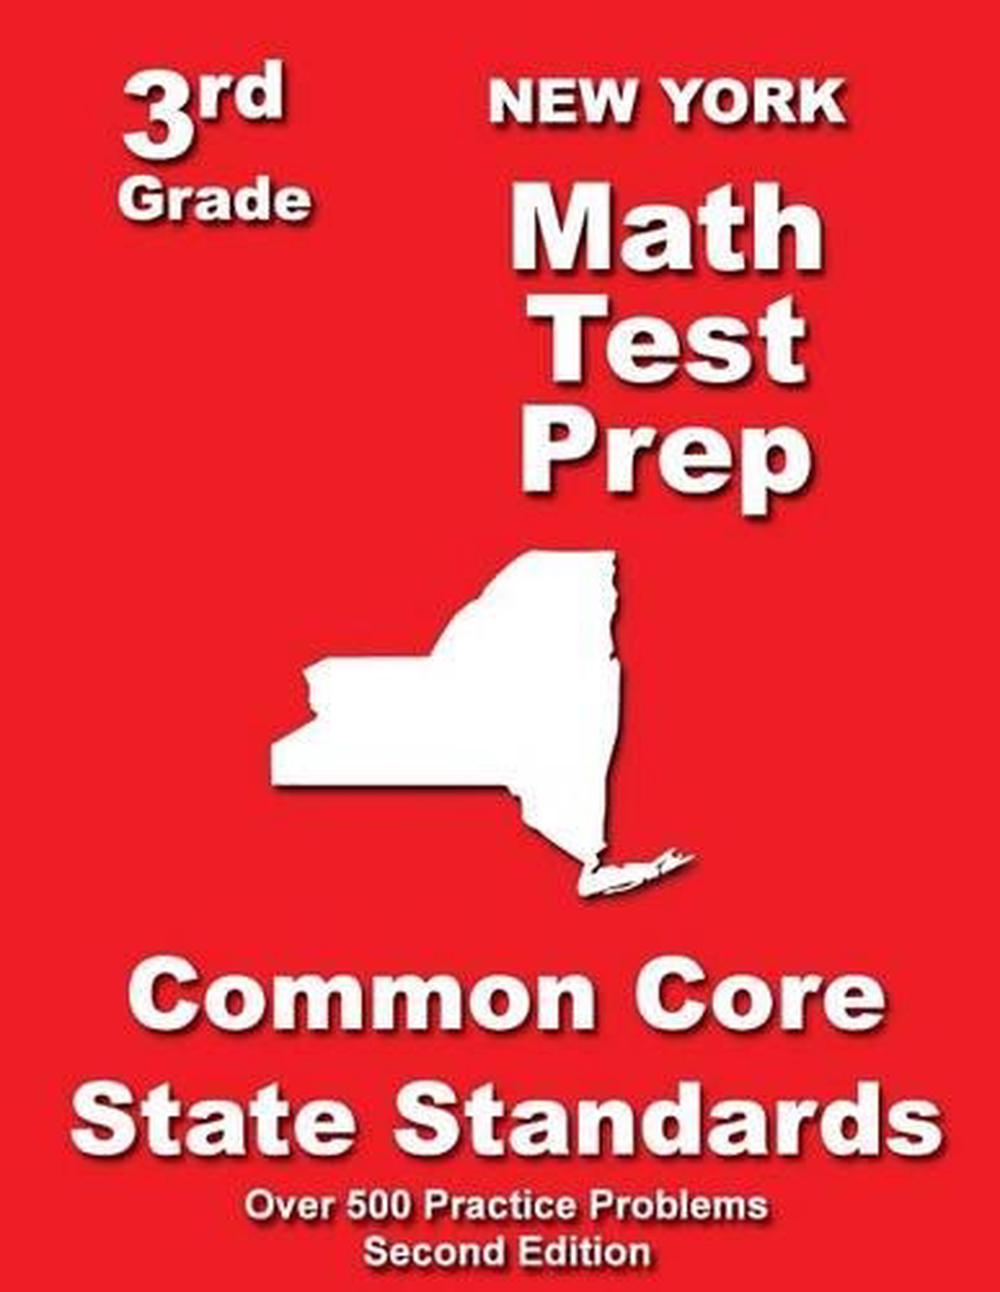 New York 3rd Grade Math Test Prep Common Core State Standards by